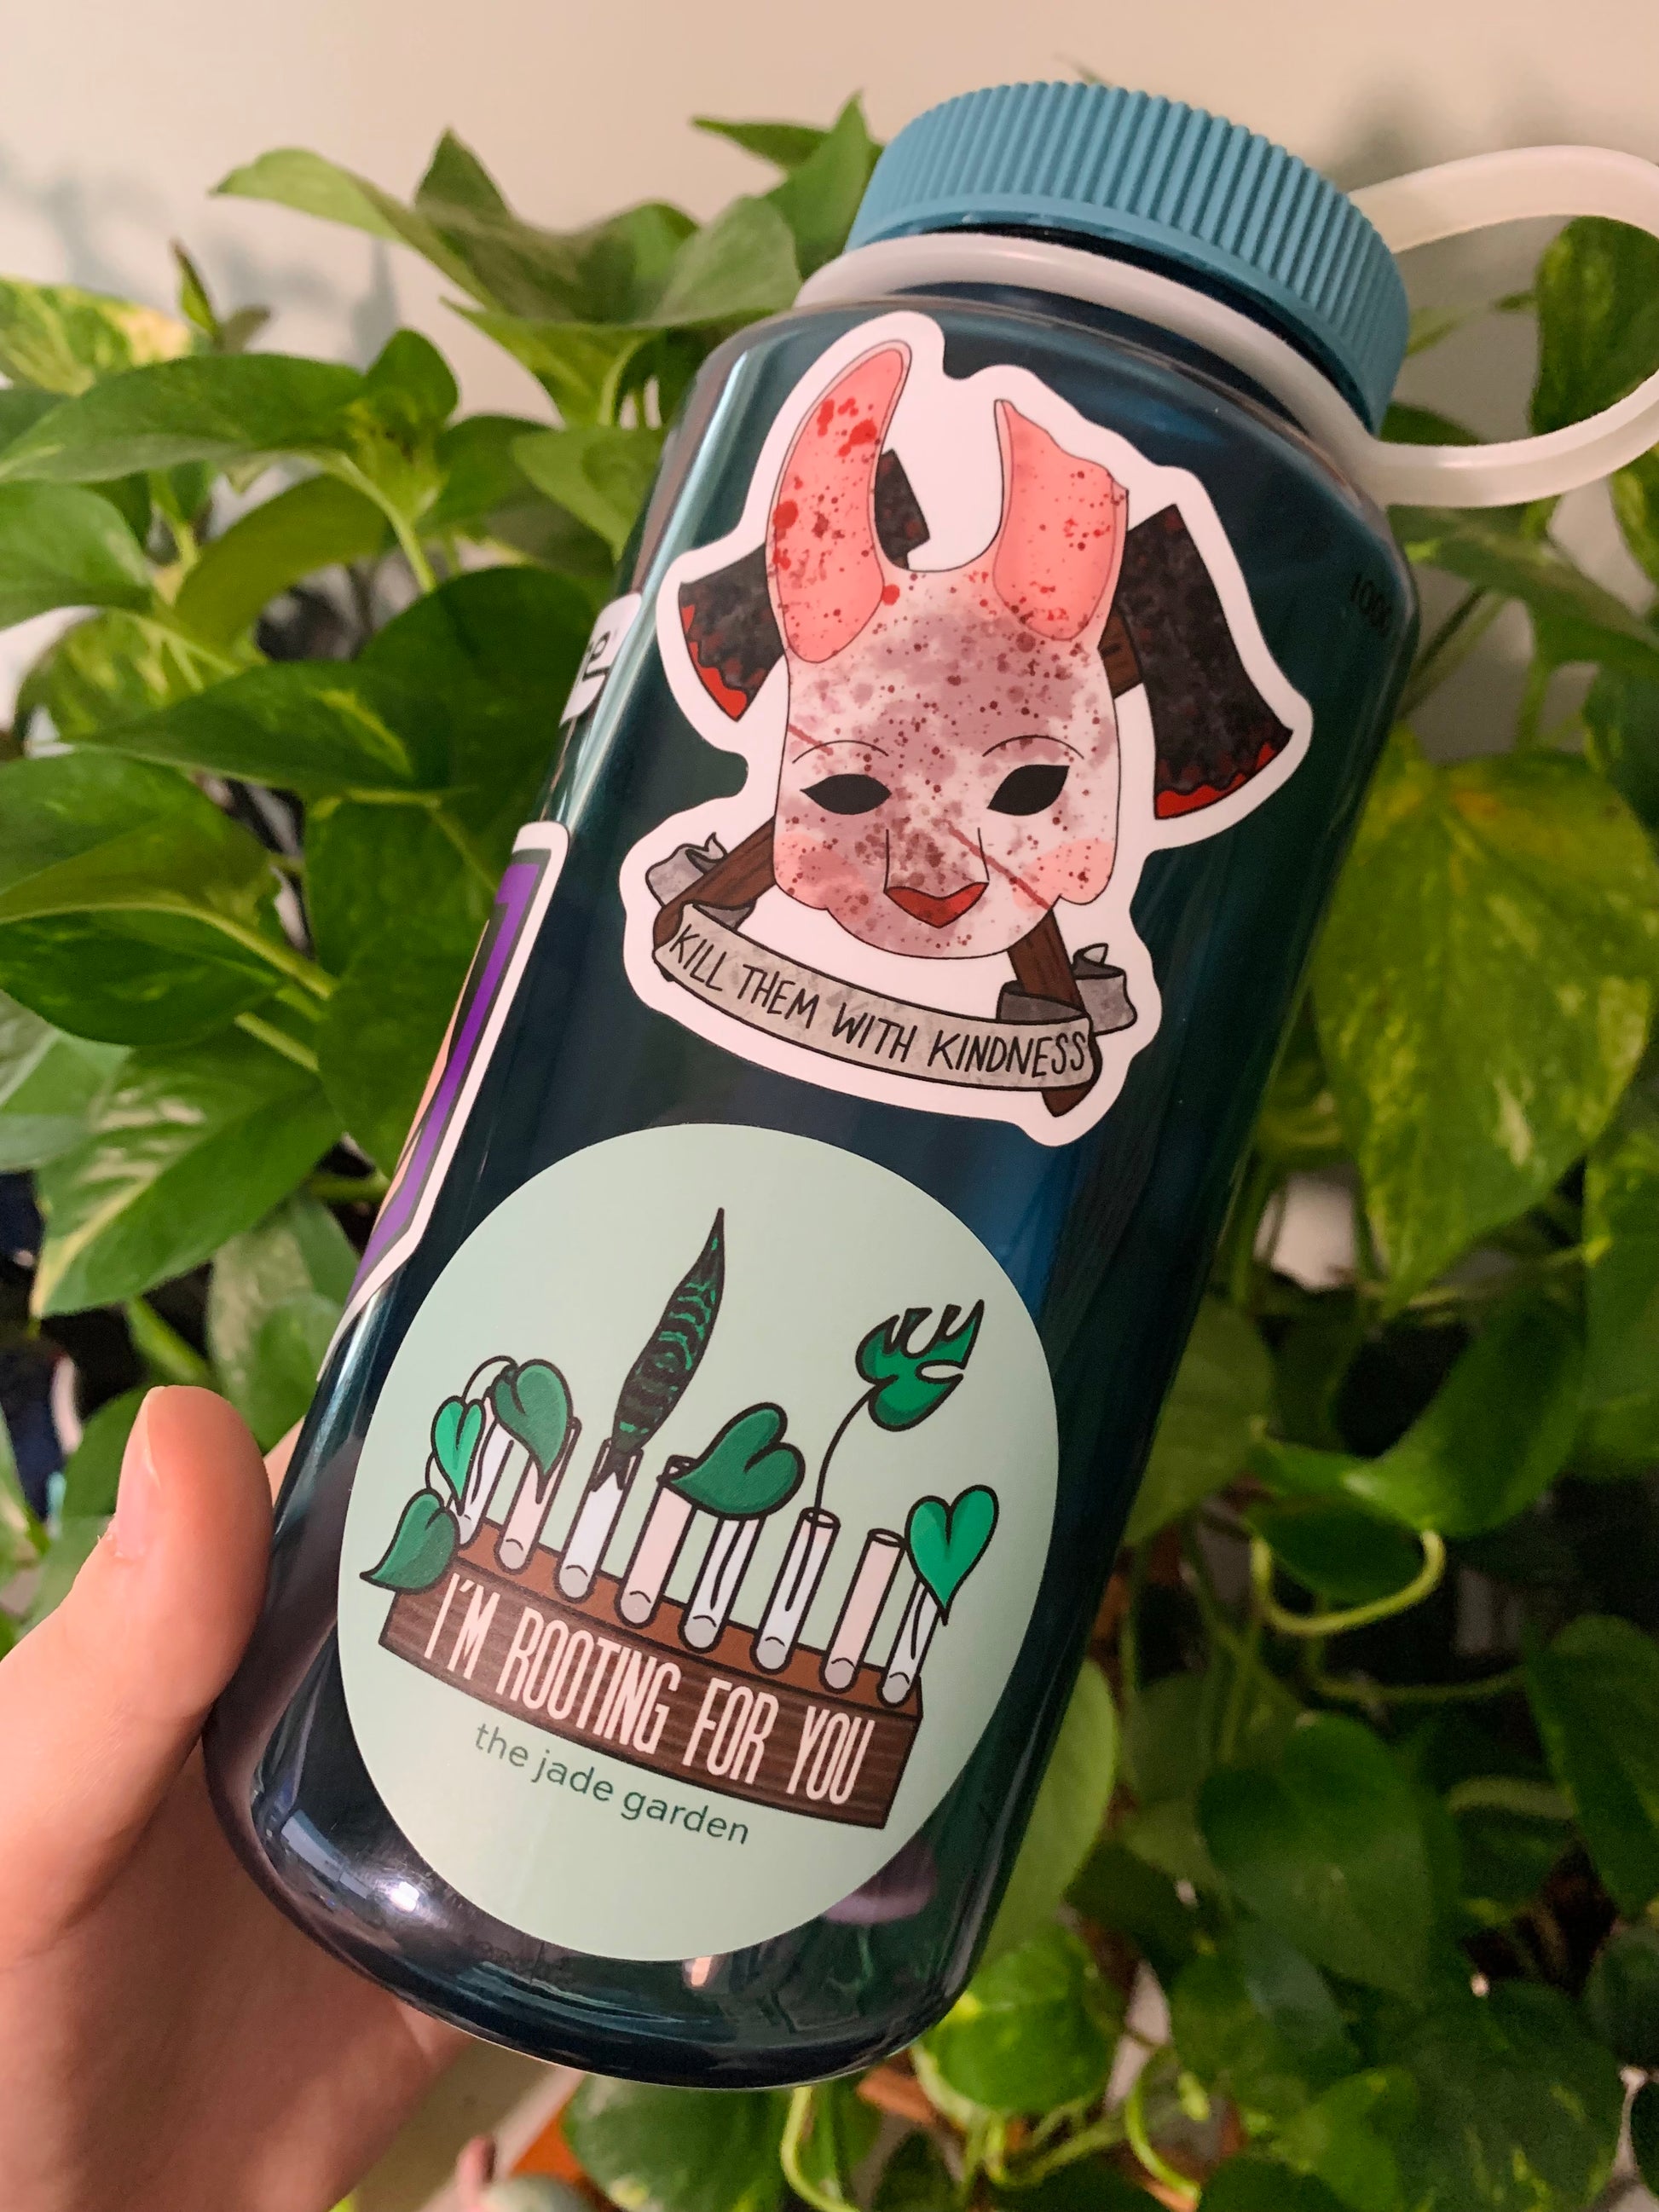 A blue nalgene water bottle in front of plants, with the Kill Them With Kindness Huntress Sticker & I'm Rooting For You propagation sticker on the side.